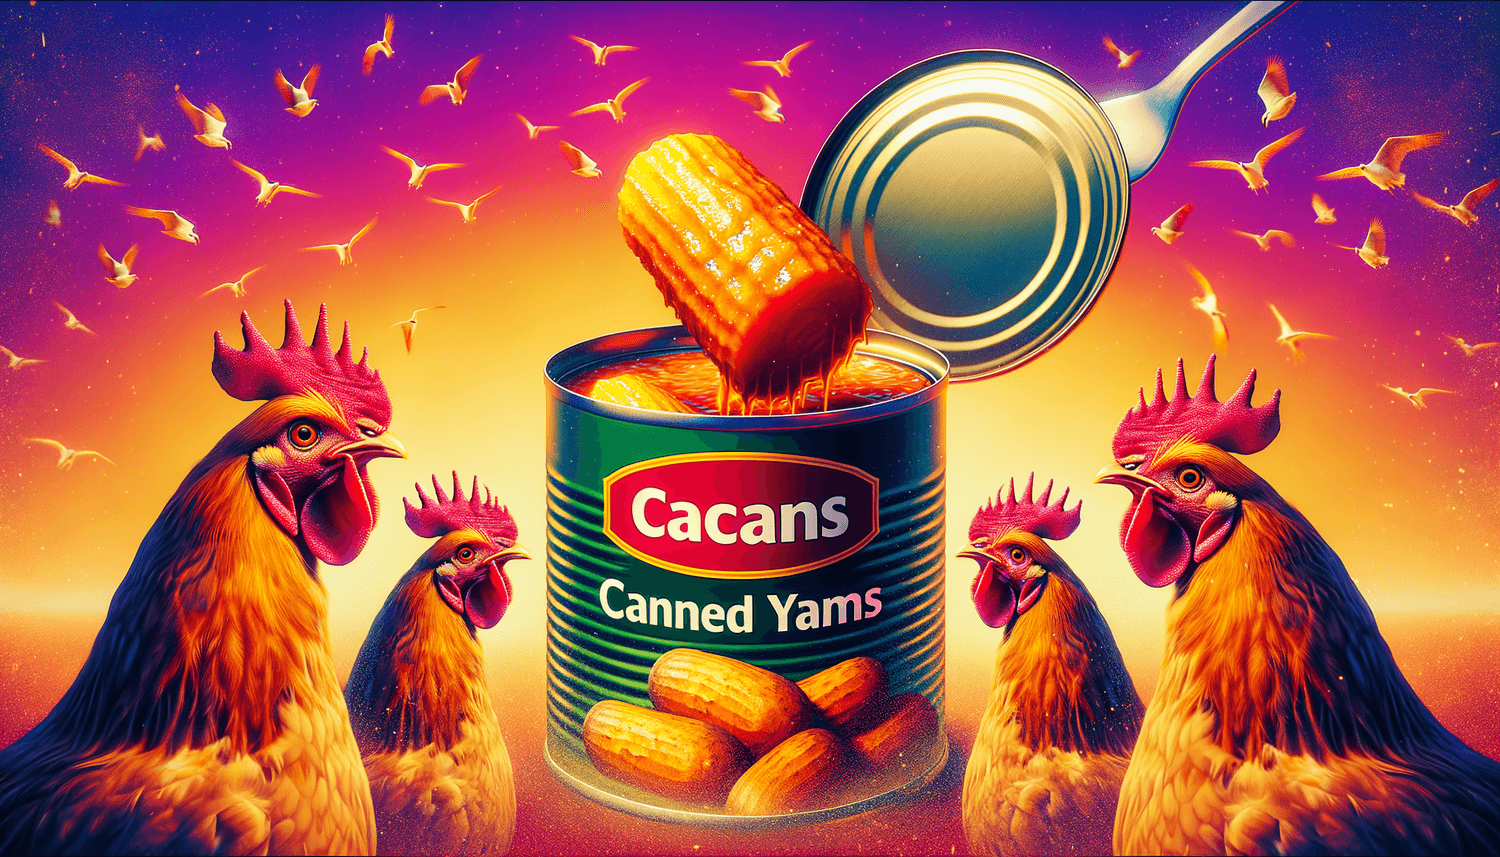 Can Chickens Eat Canned Yams?